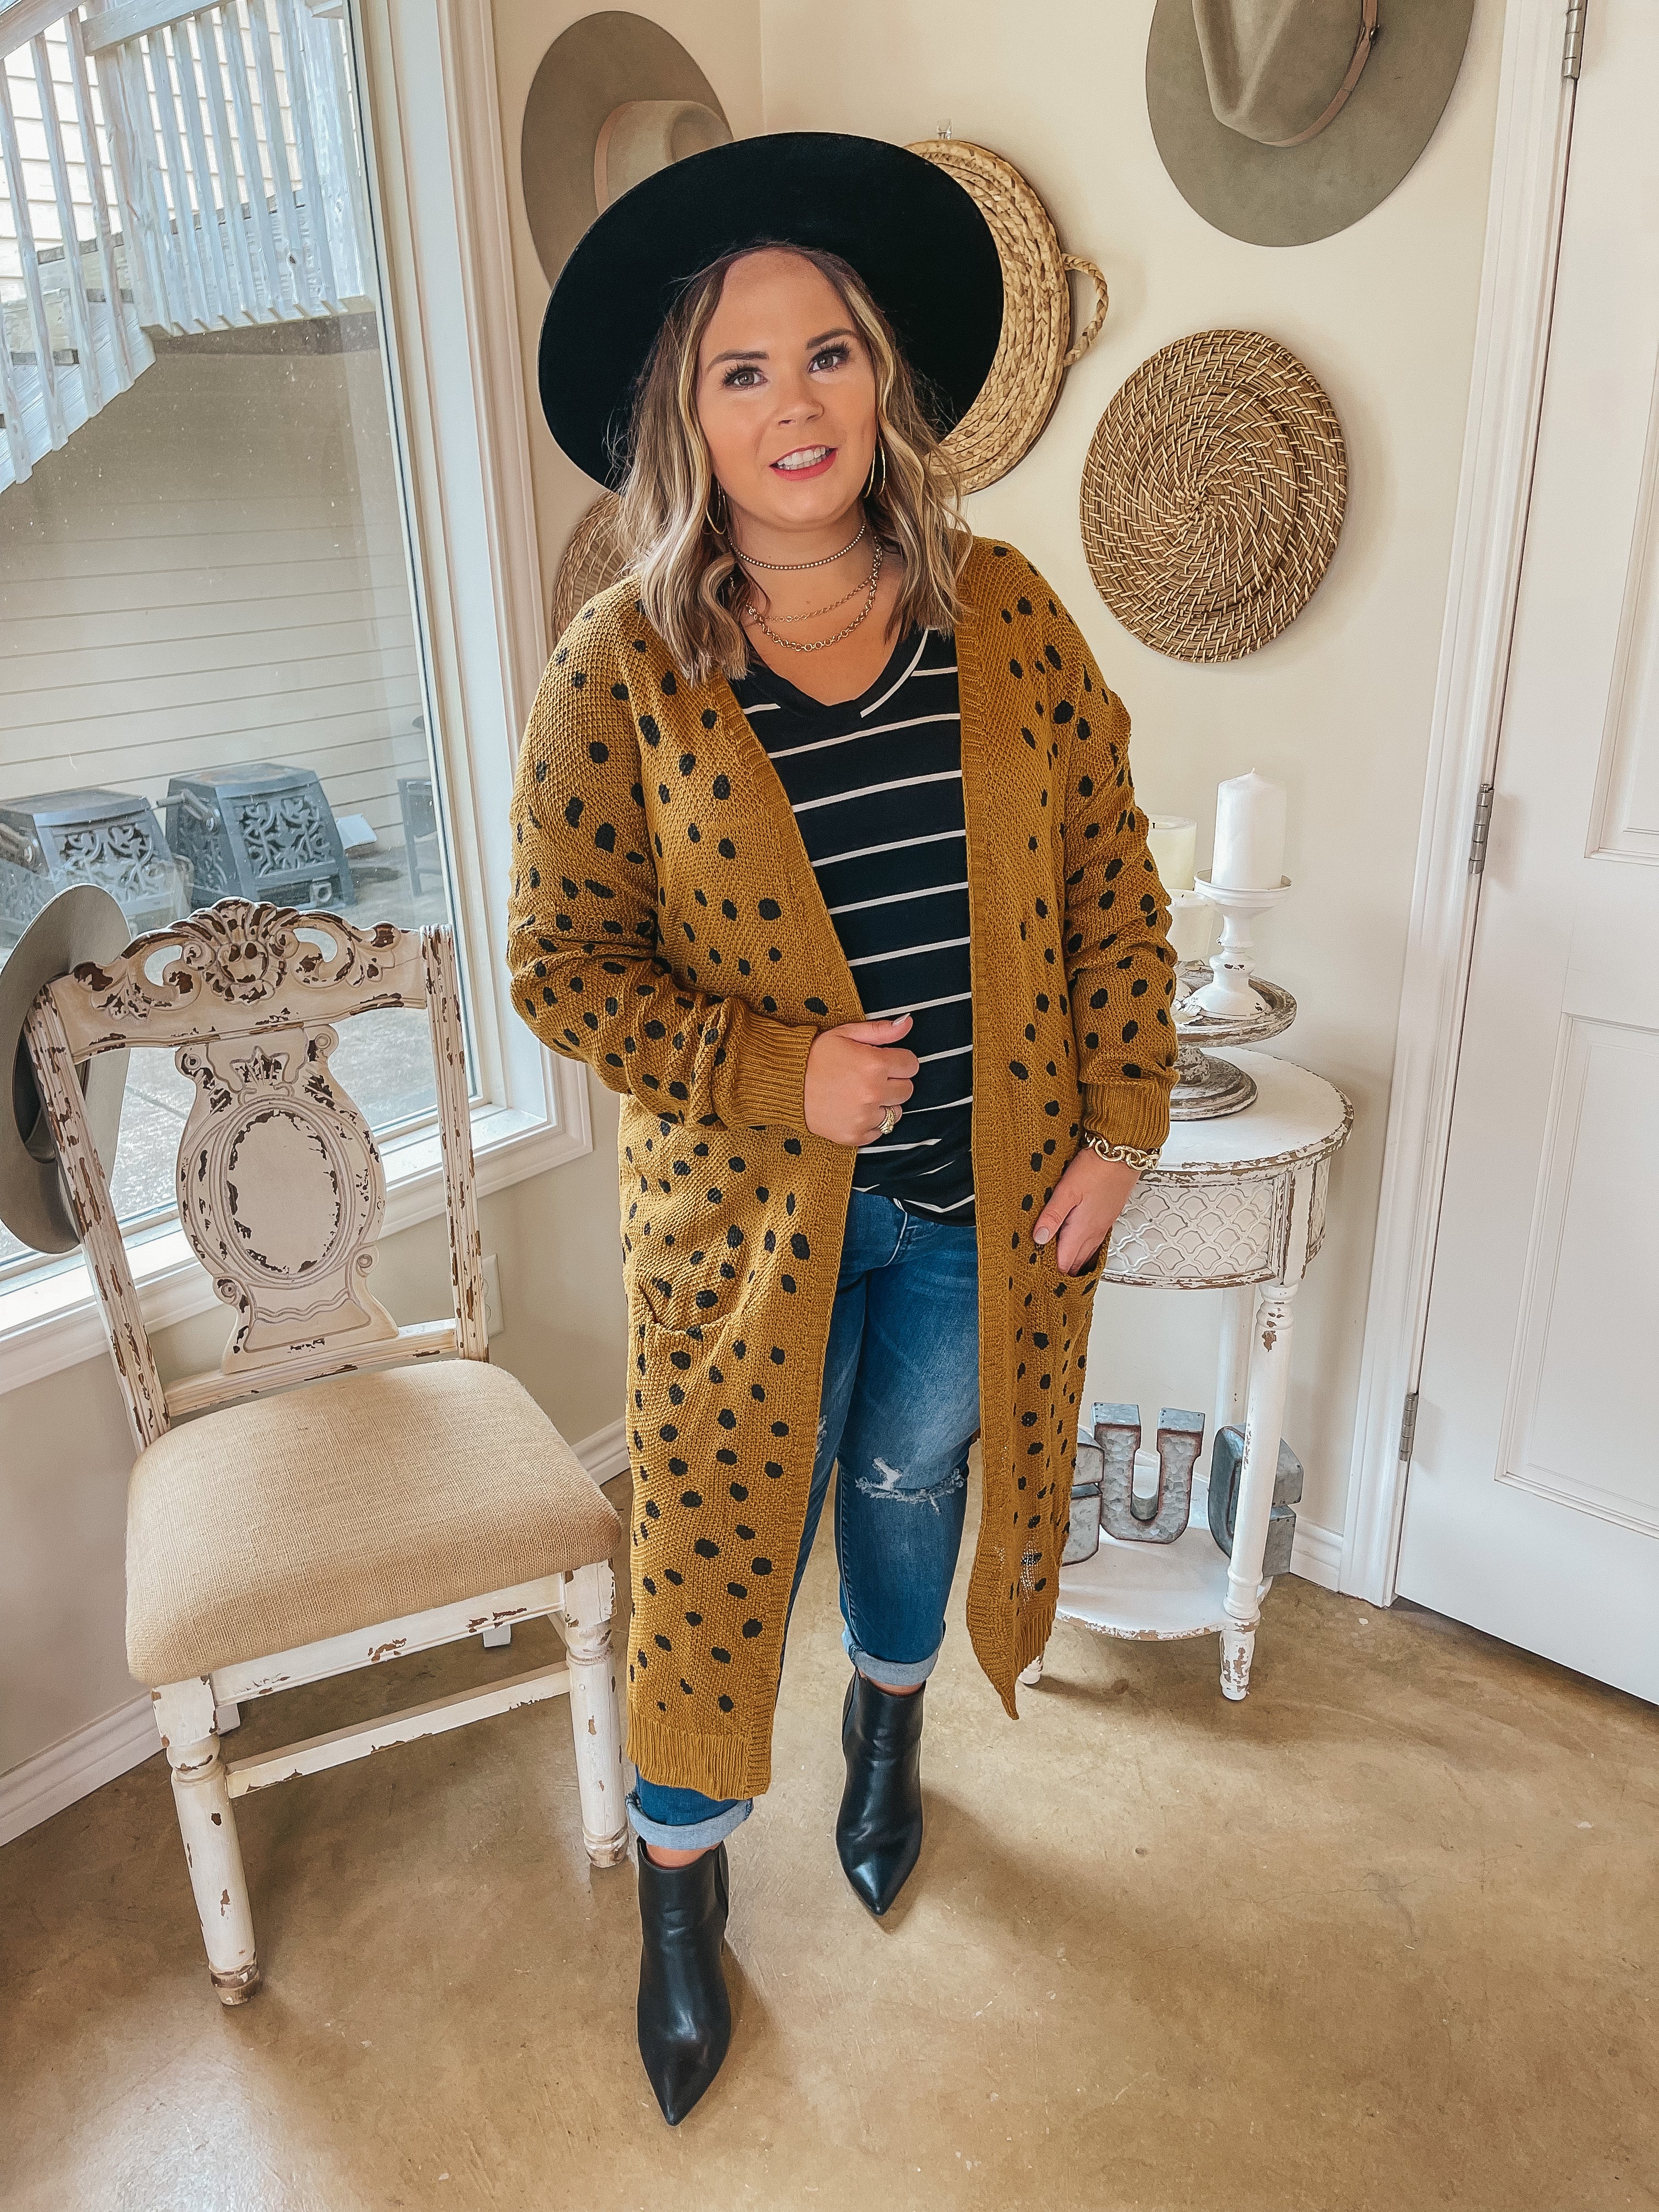 Boho Lifestyle Long Sleeve Polka Dot Duster Cardigan in Mustard Yellow - Giddy Up Glamour Boutique